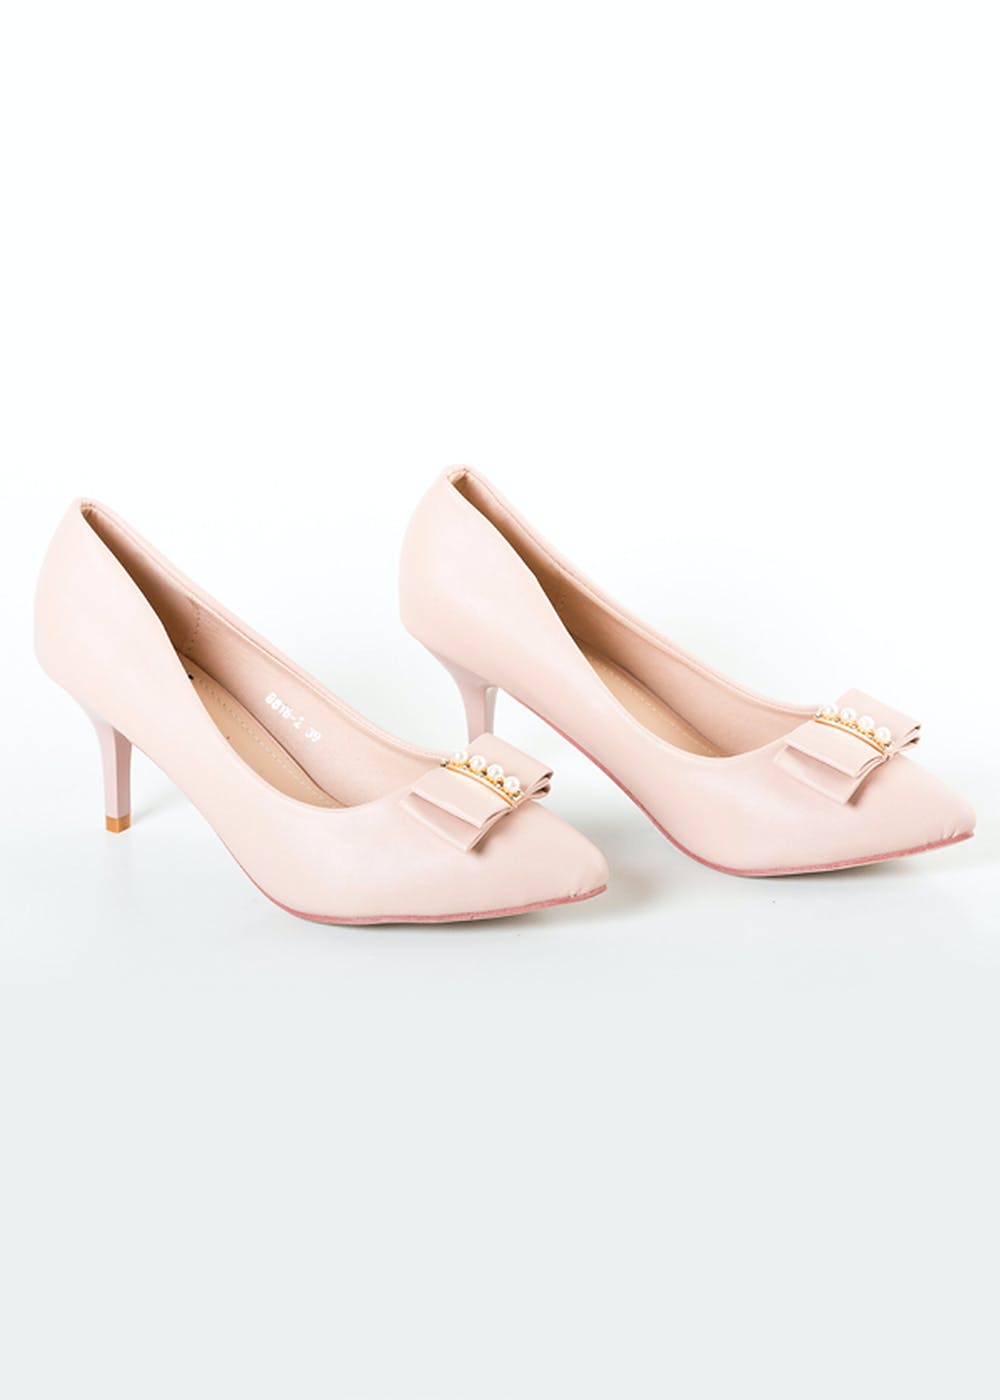 Pastel Pink Women High Heel Shoes and Bag on Pink Background. Flat Lay, Top  View Trendy Fashion Feminine Background. Beauty Blog C Stock Photo - Image  of accessories, pink: 123176158